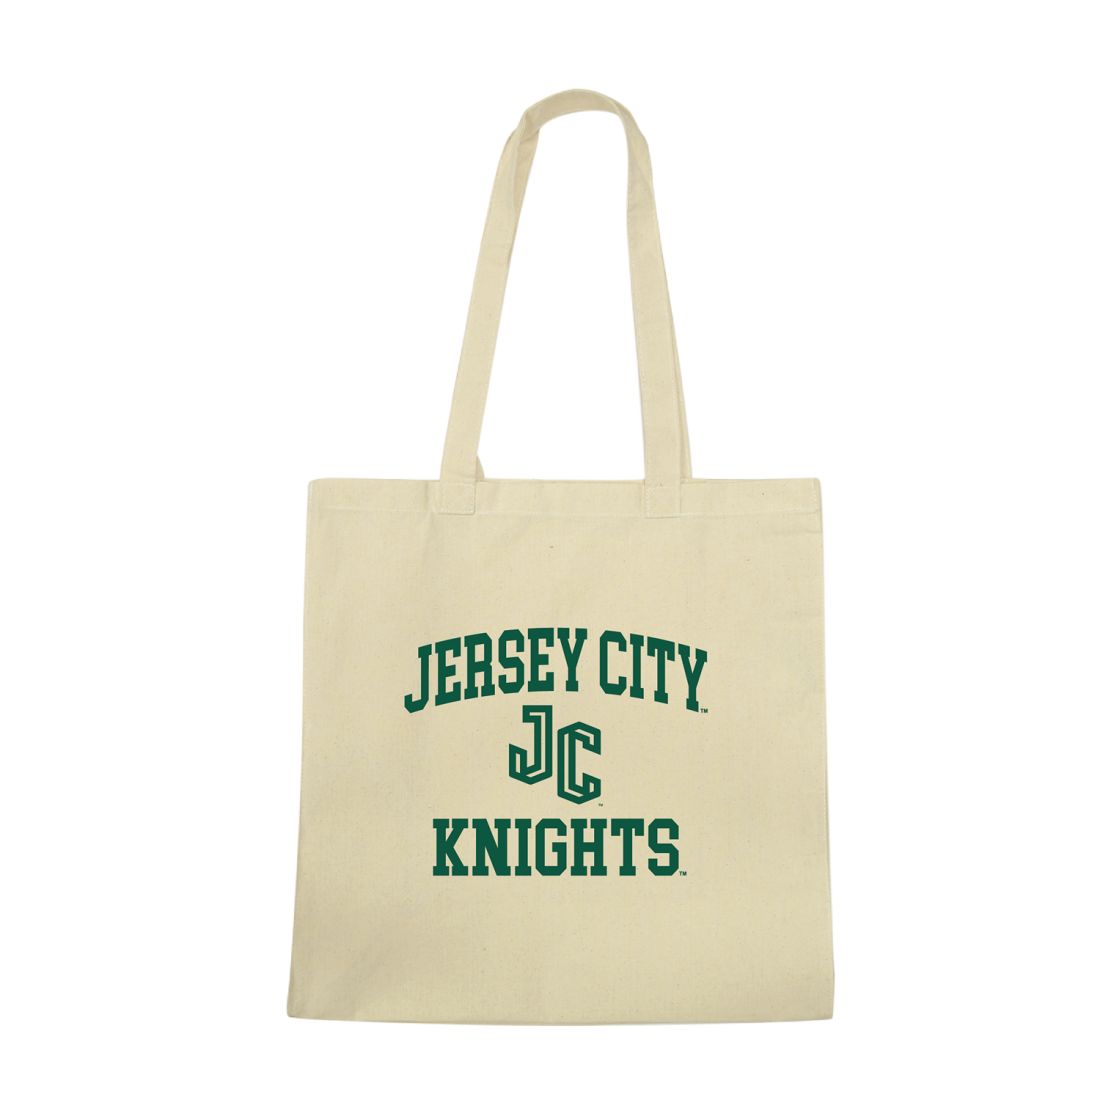 New Jersey City University Knights Institutional Seal Tote Bag